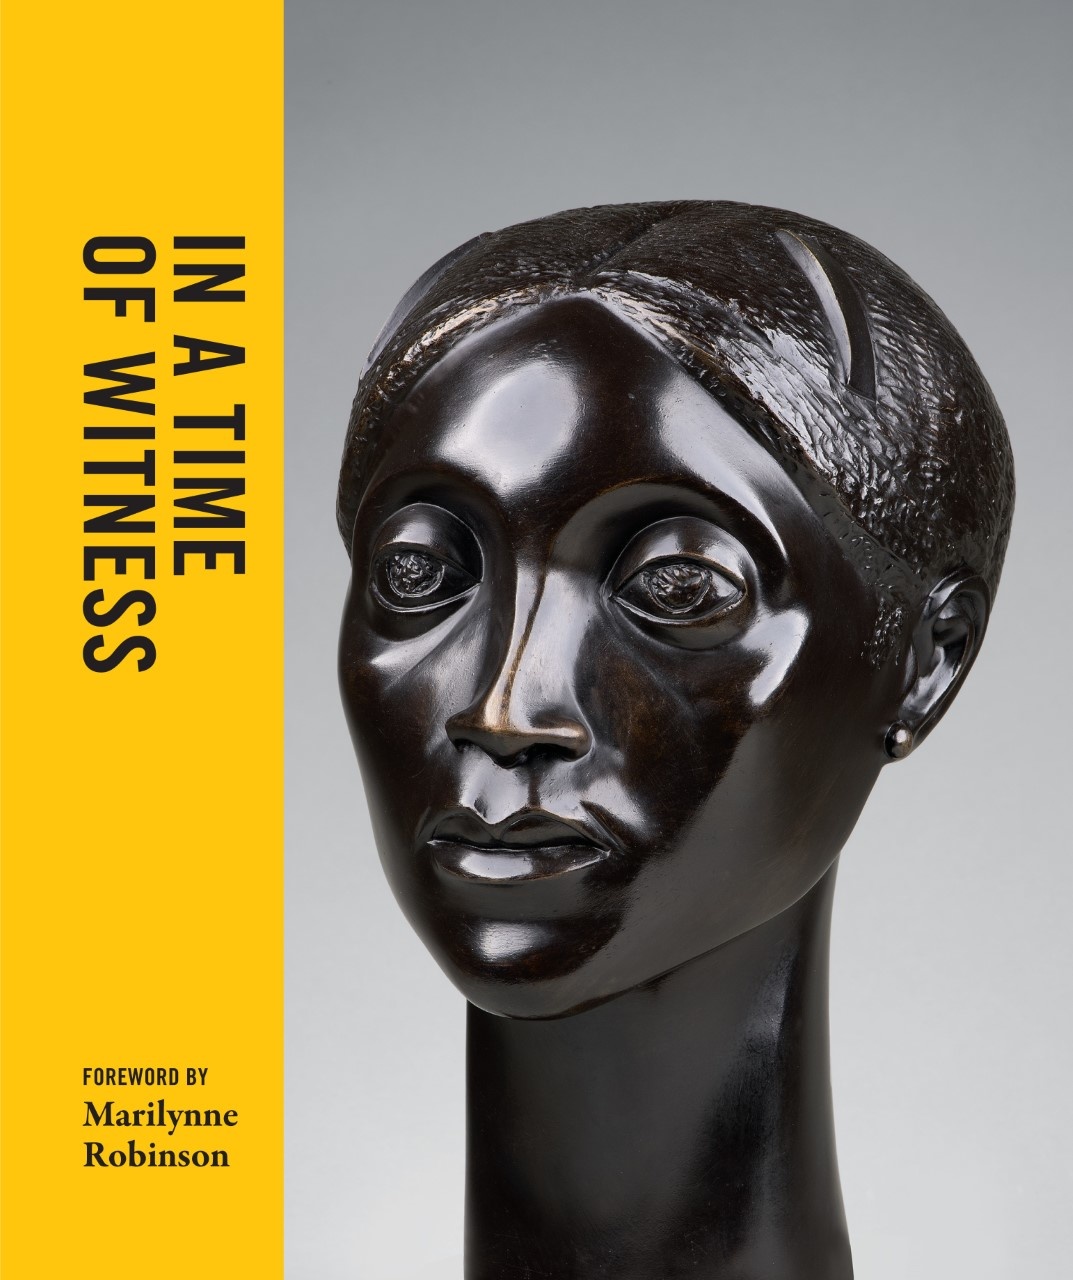 Image of the front cover of "In a Time of Witness." It features a detail shot of Elizabeth Catlett's "Glory," with a yellow sidebar that features the book's title.